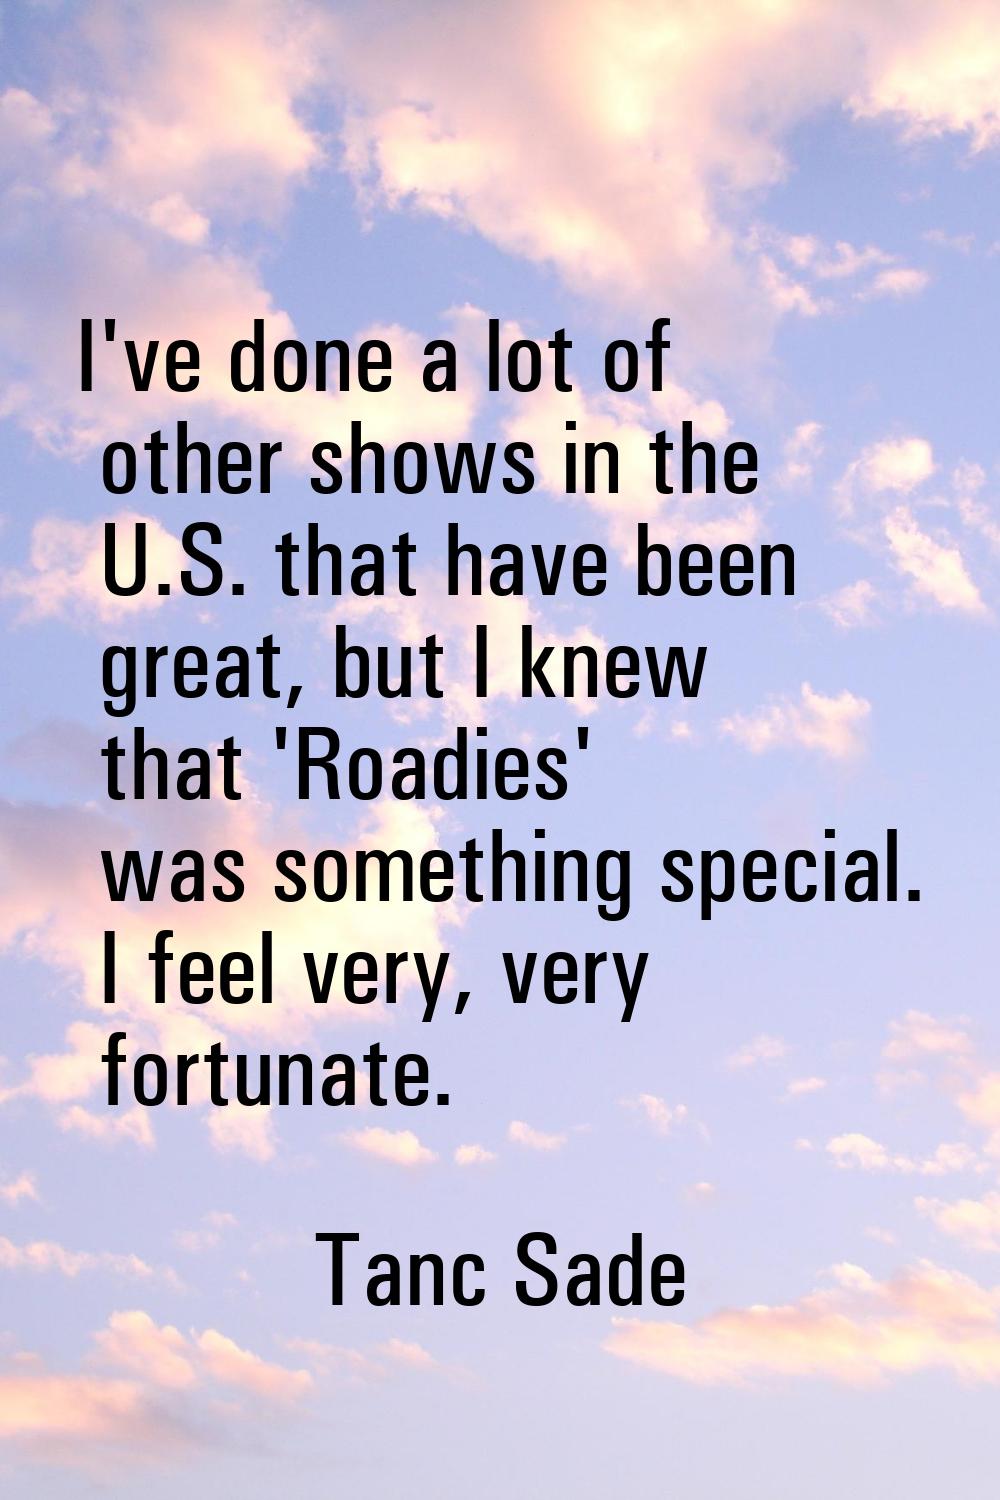 I've done a lot of other shows in the U.S. that have been great, but I knew that 'Roadies' was some